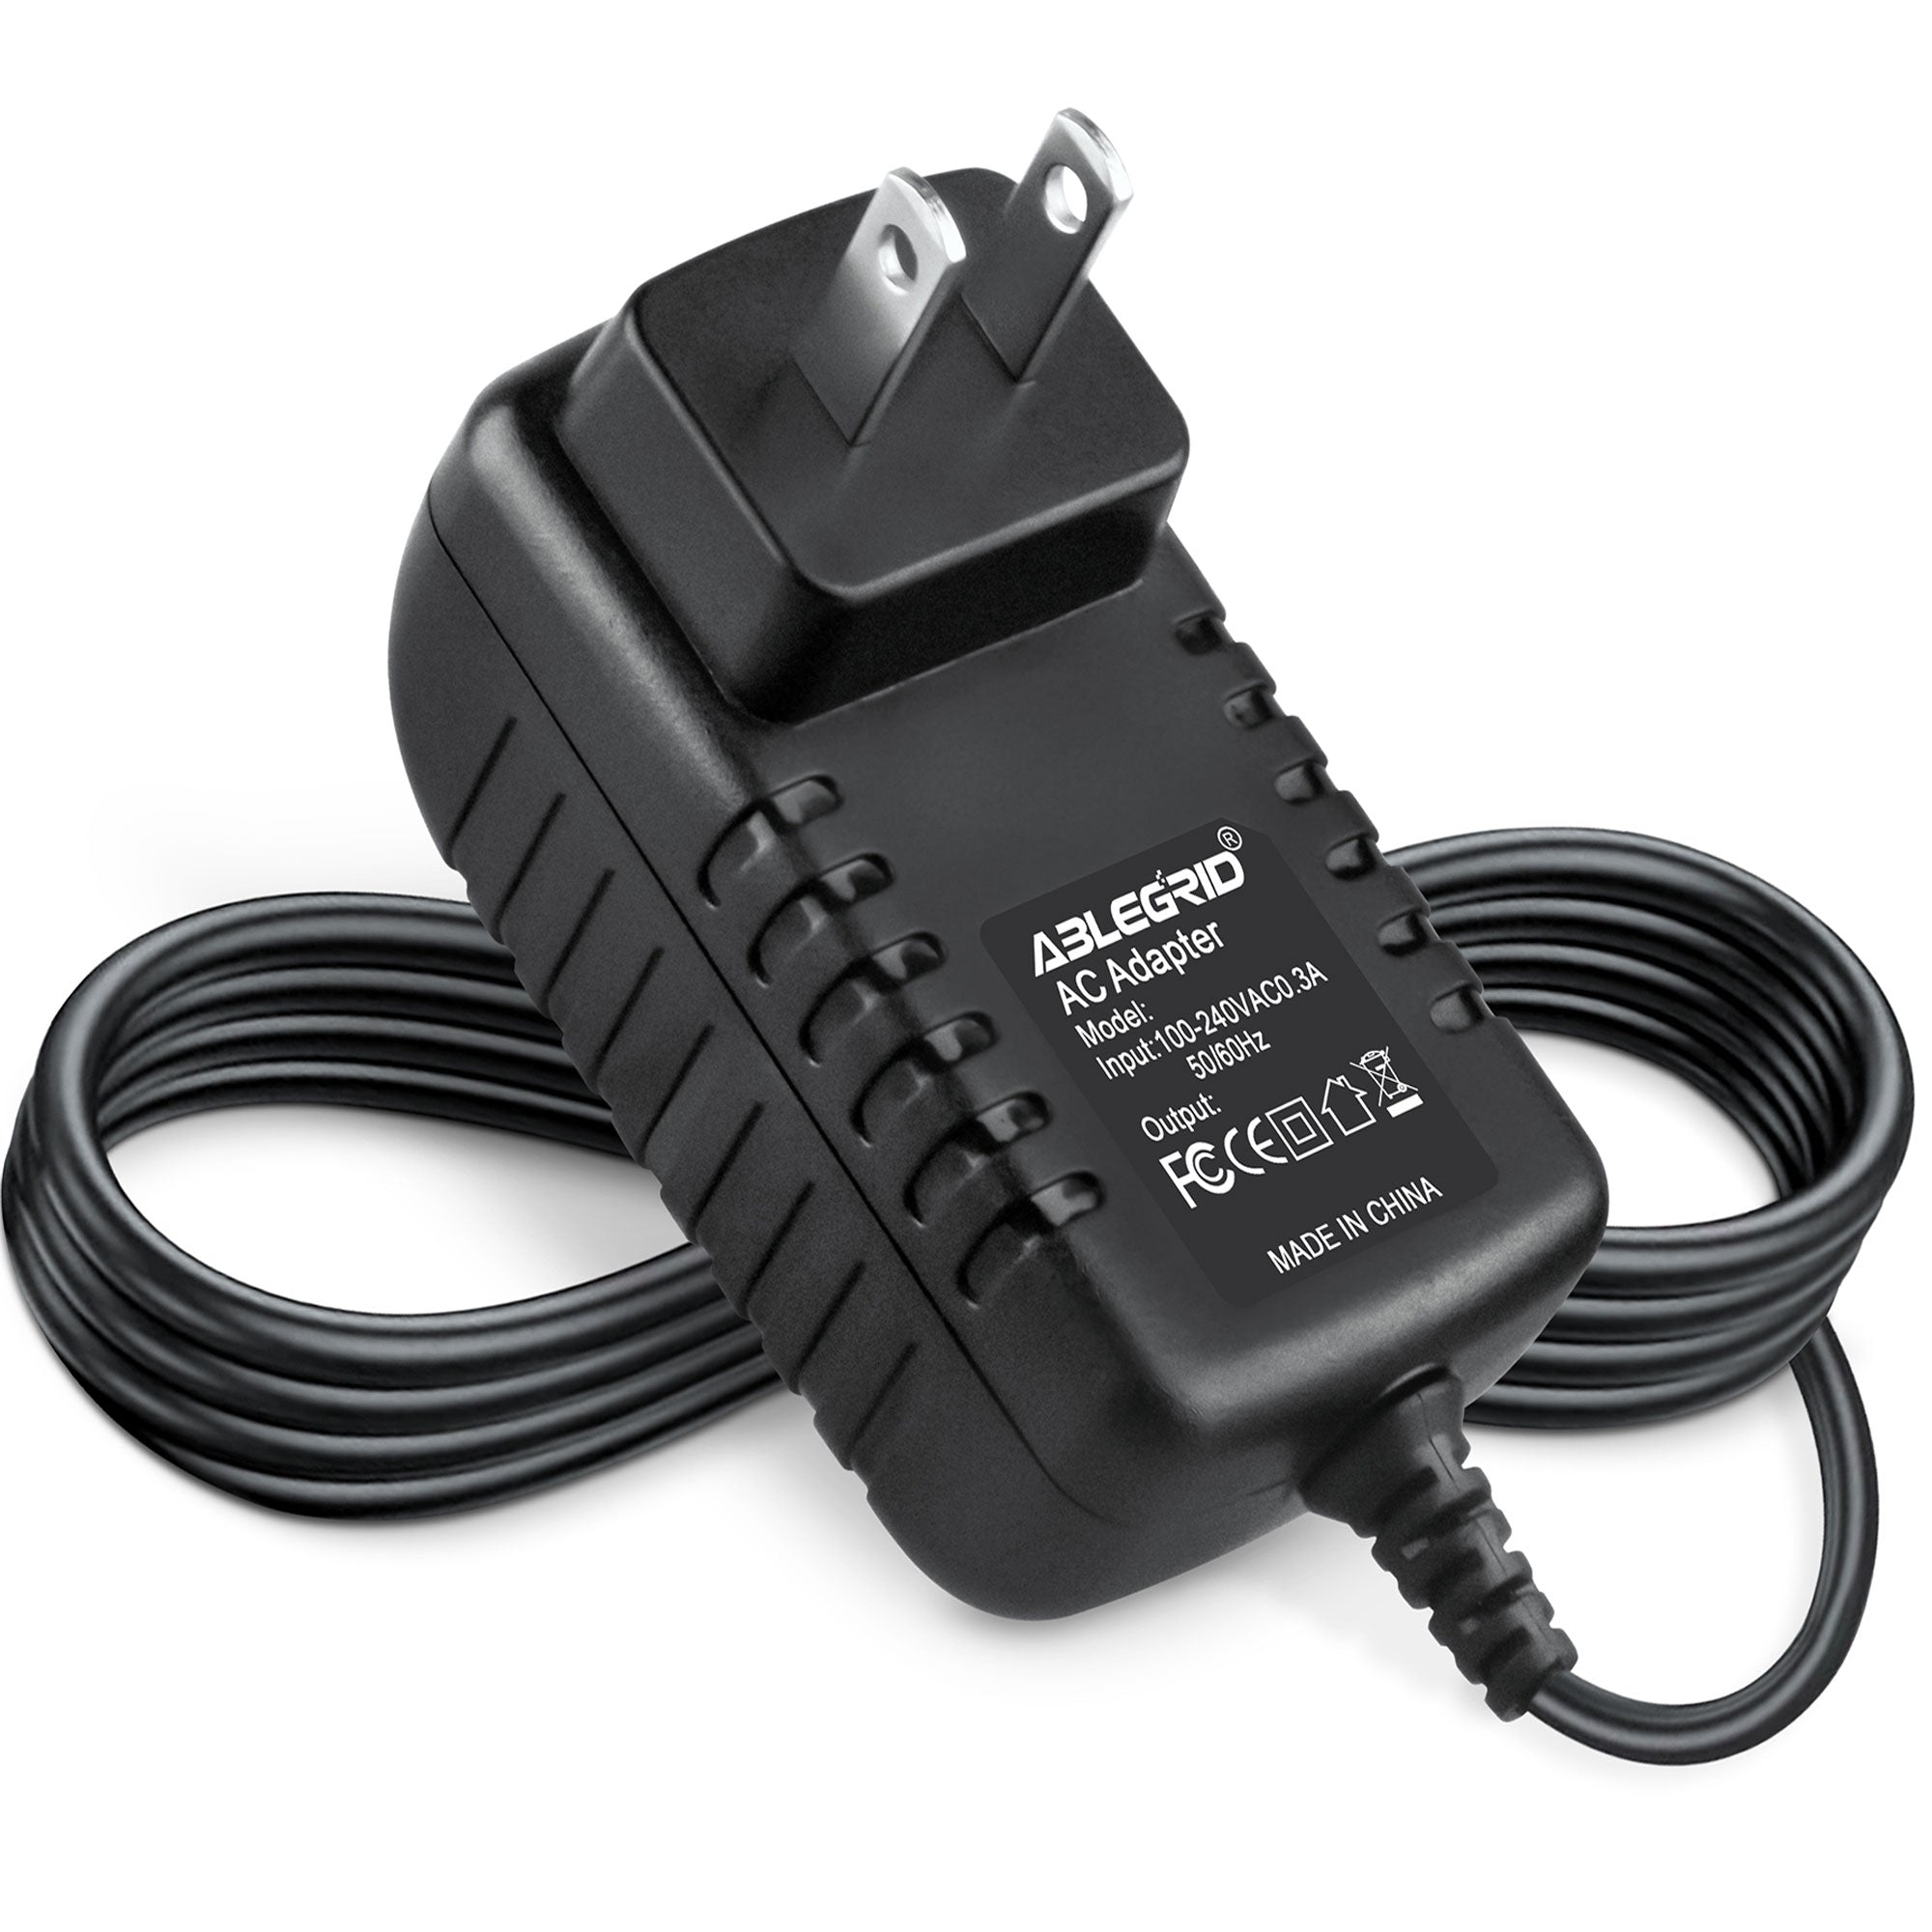 AbleGrid AC/DC Adapter for Model: FM120020 FM120020-US FM120020-C Pandigital Picture Frame Switching Power Supply Cord Cable PS Charger Input: 100 - 240 VAC Worldwide Use Mains PSU